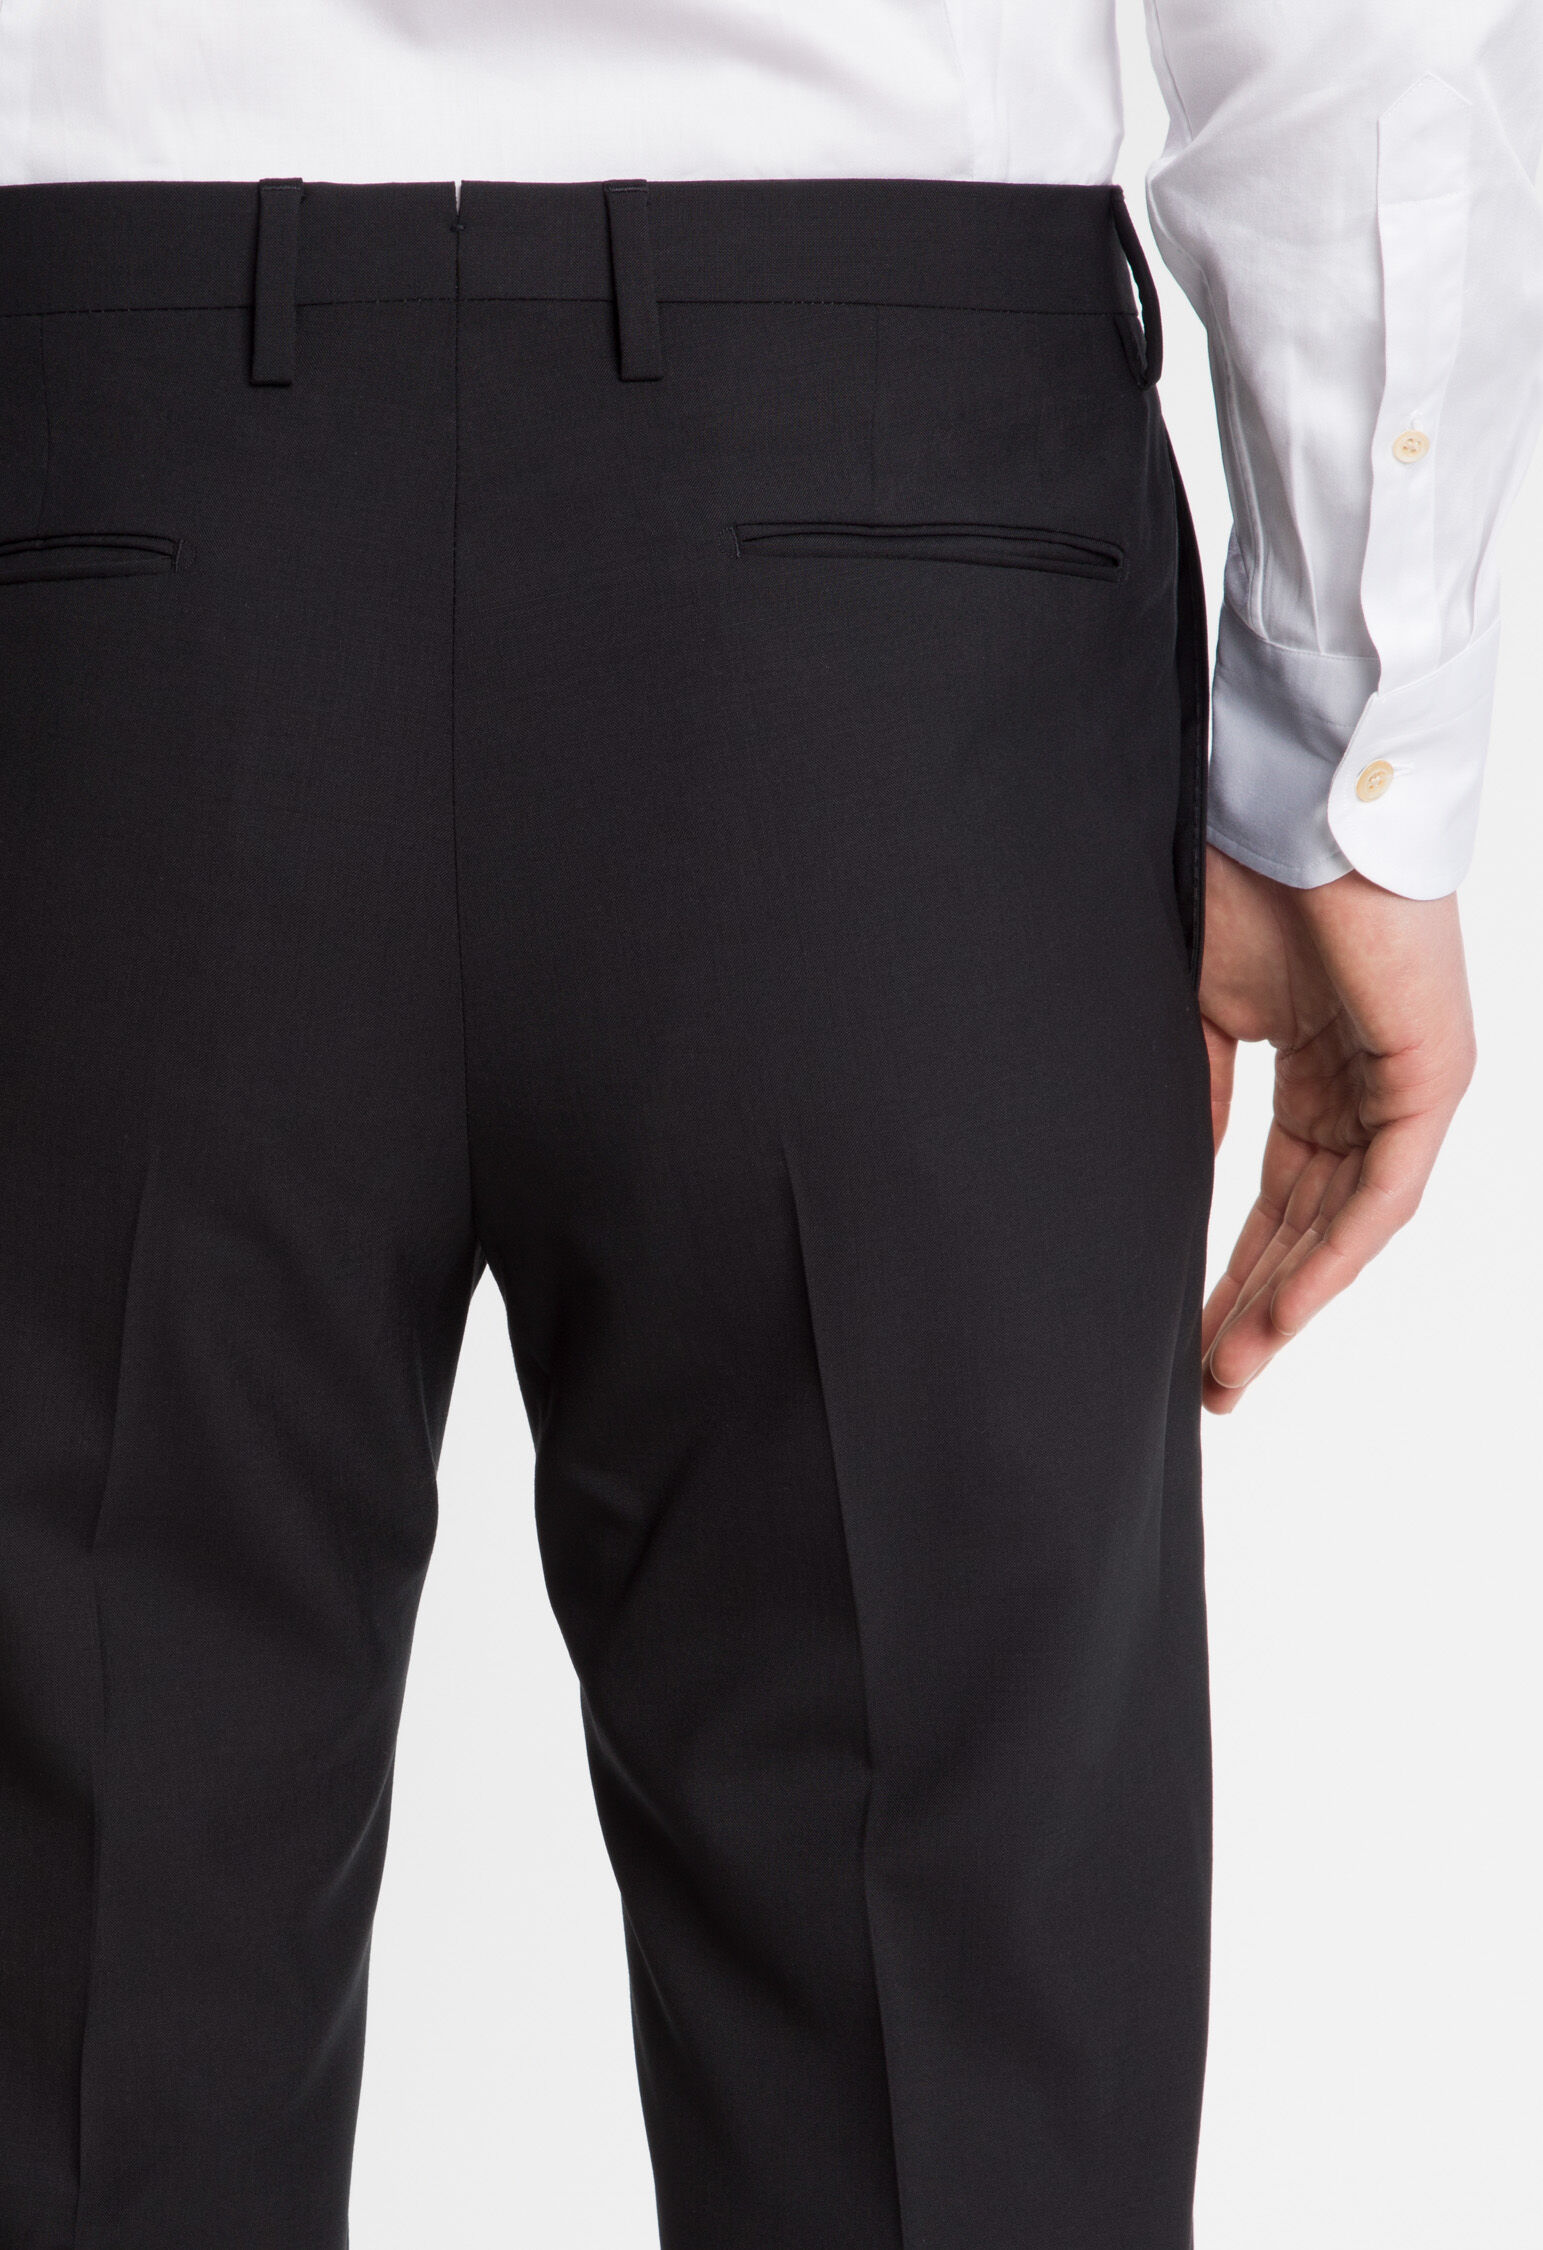 Suit Direct Everyday Occasions Black Trouser